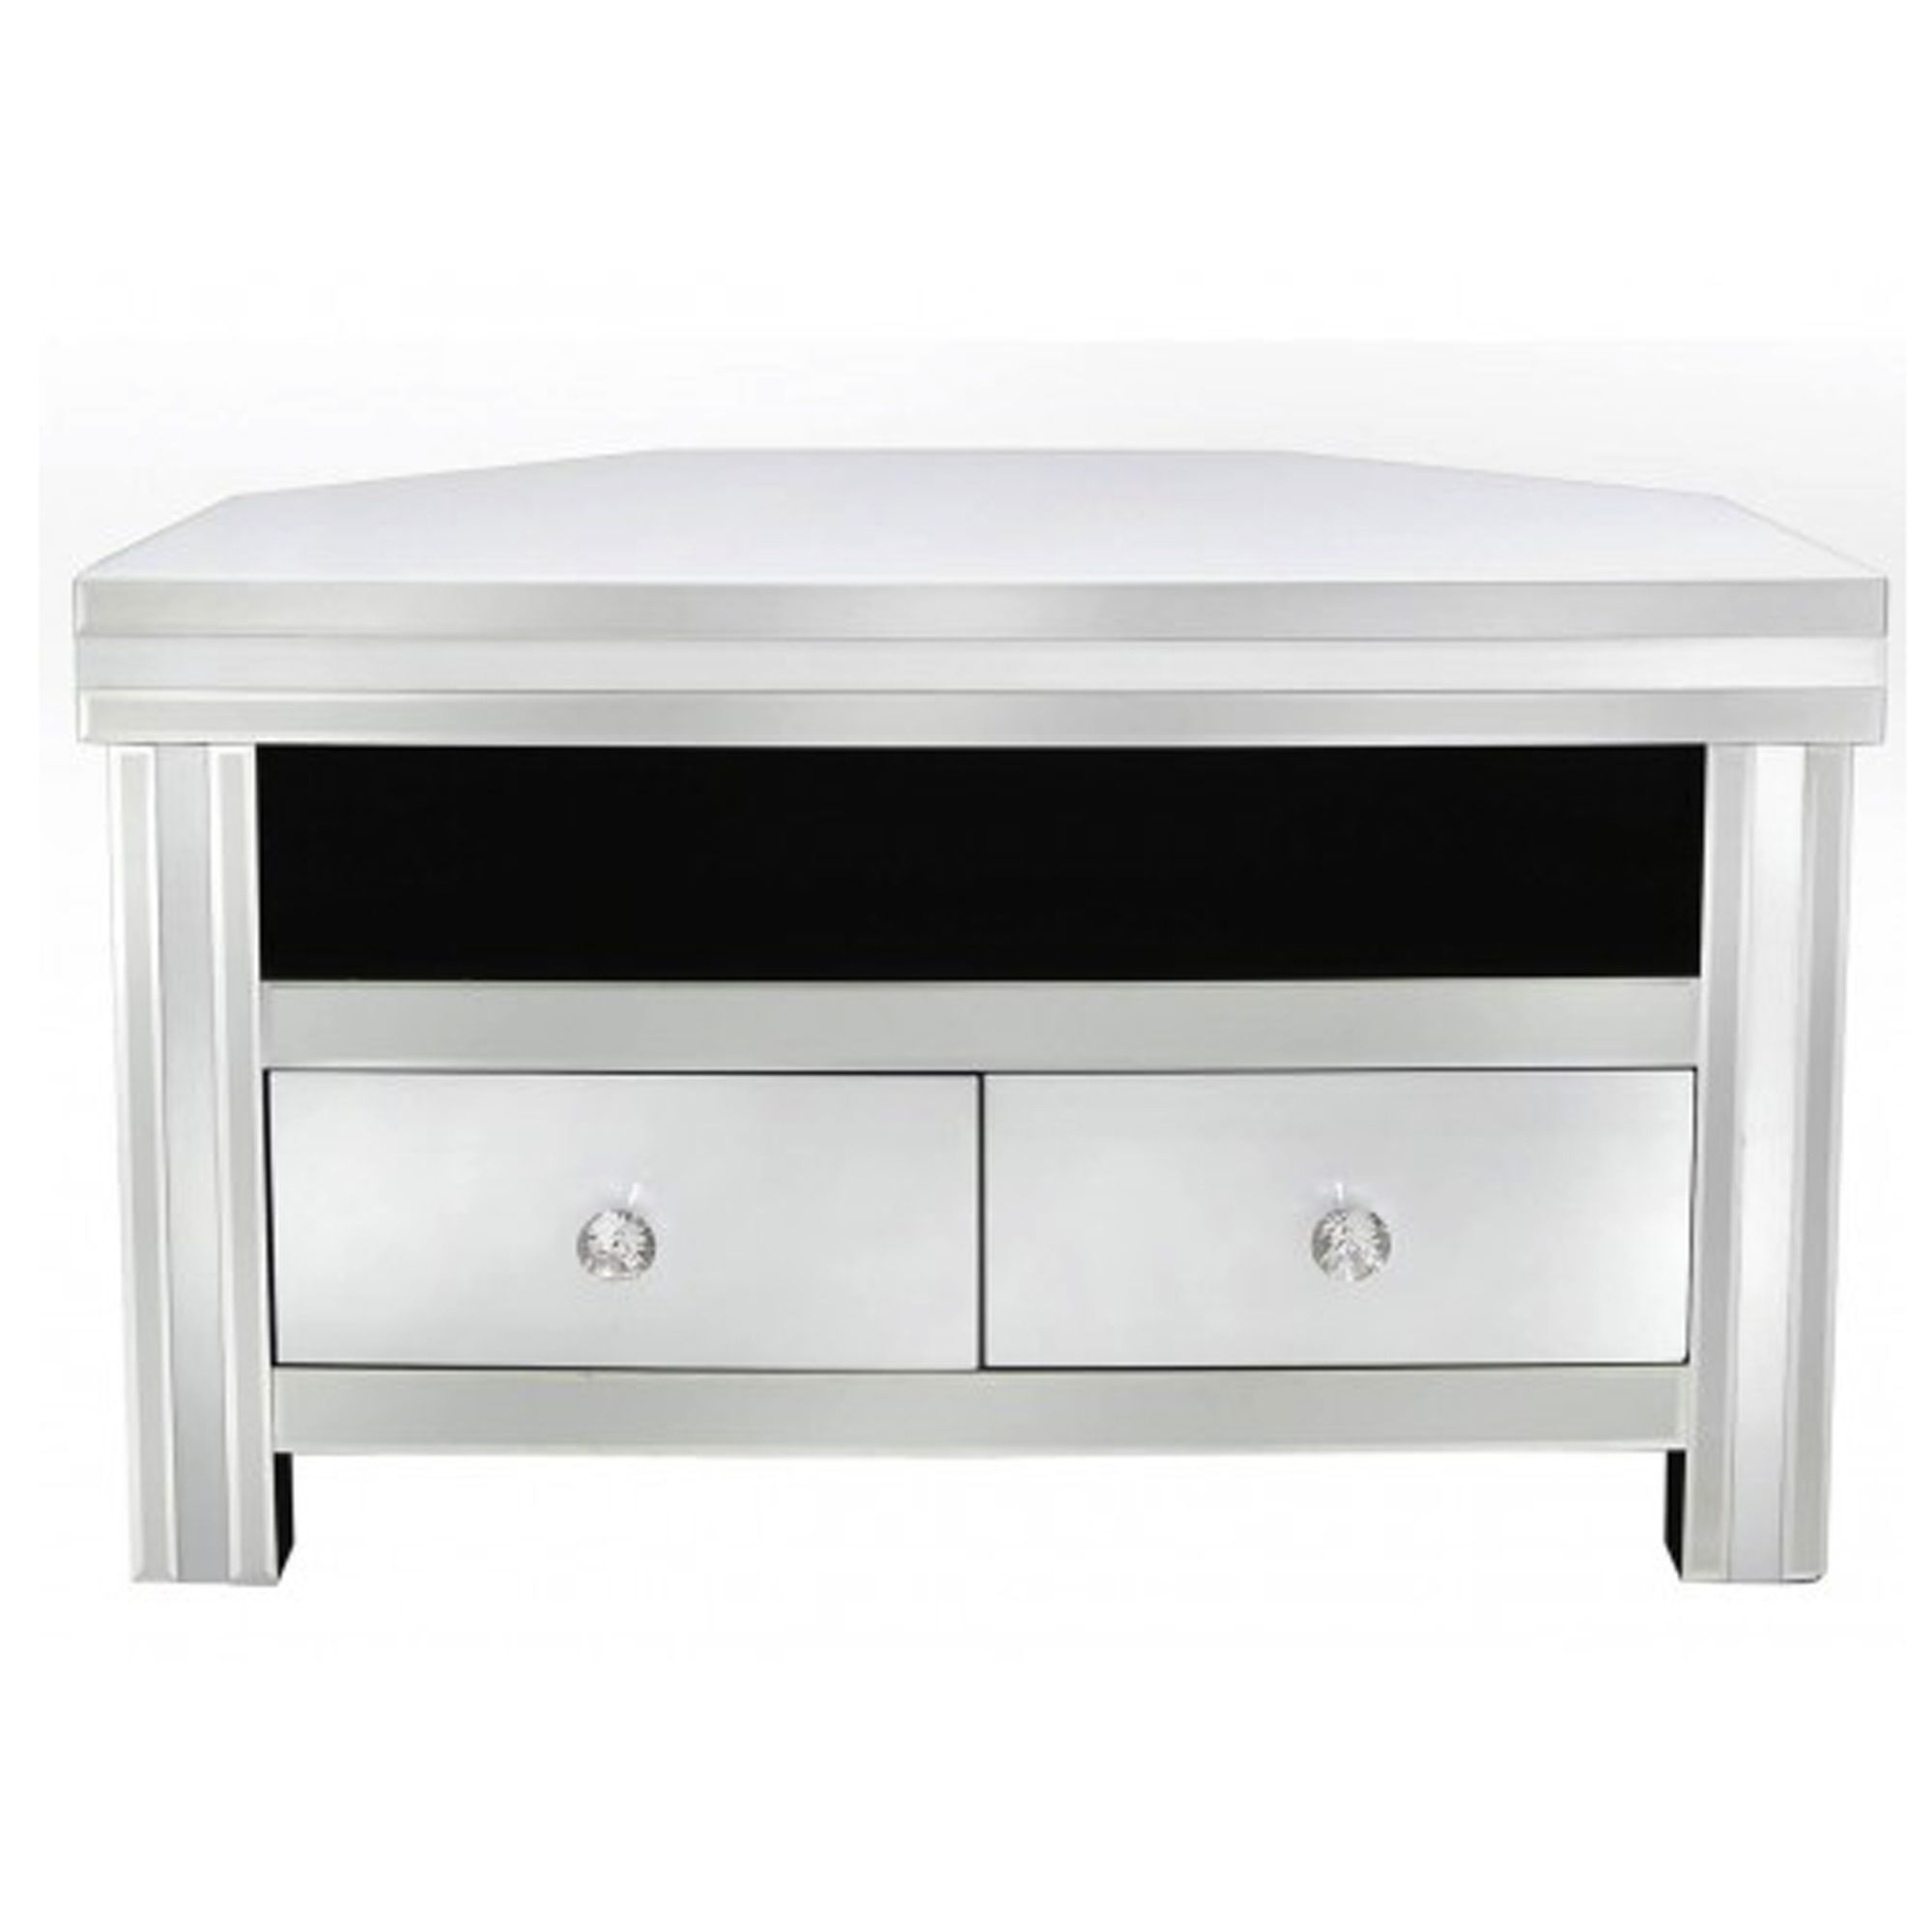 Alghero White Mirrored Corner Tv Unit | Tv Stands Throughout Fitzgerald Mirrored Tv Stands (Photo 2 of 15)